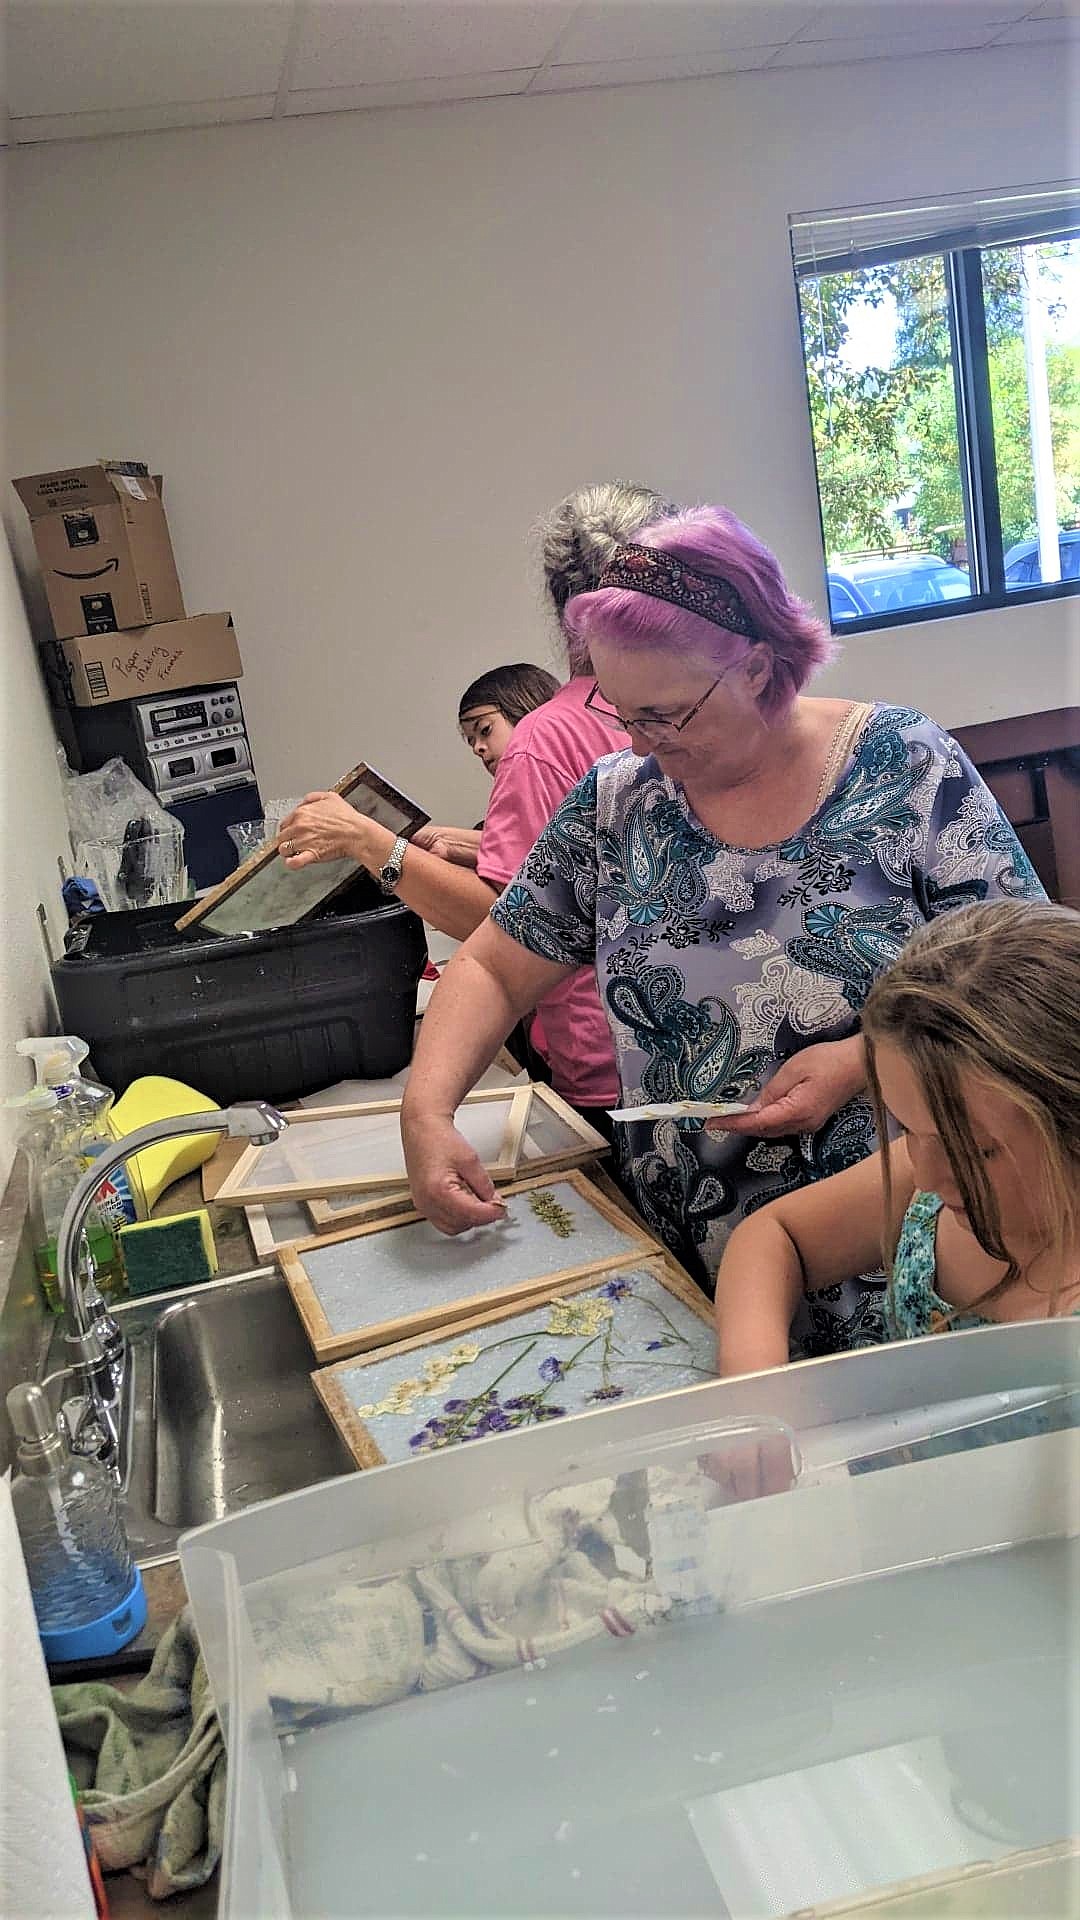 James Driscoll, Melissa Driscoll, Mary Sawyer and Rory Pileggi were part of the group for Tuesday afternoon's papermaking class at the Pinehurst Library.